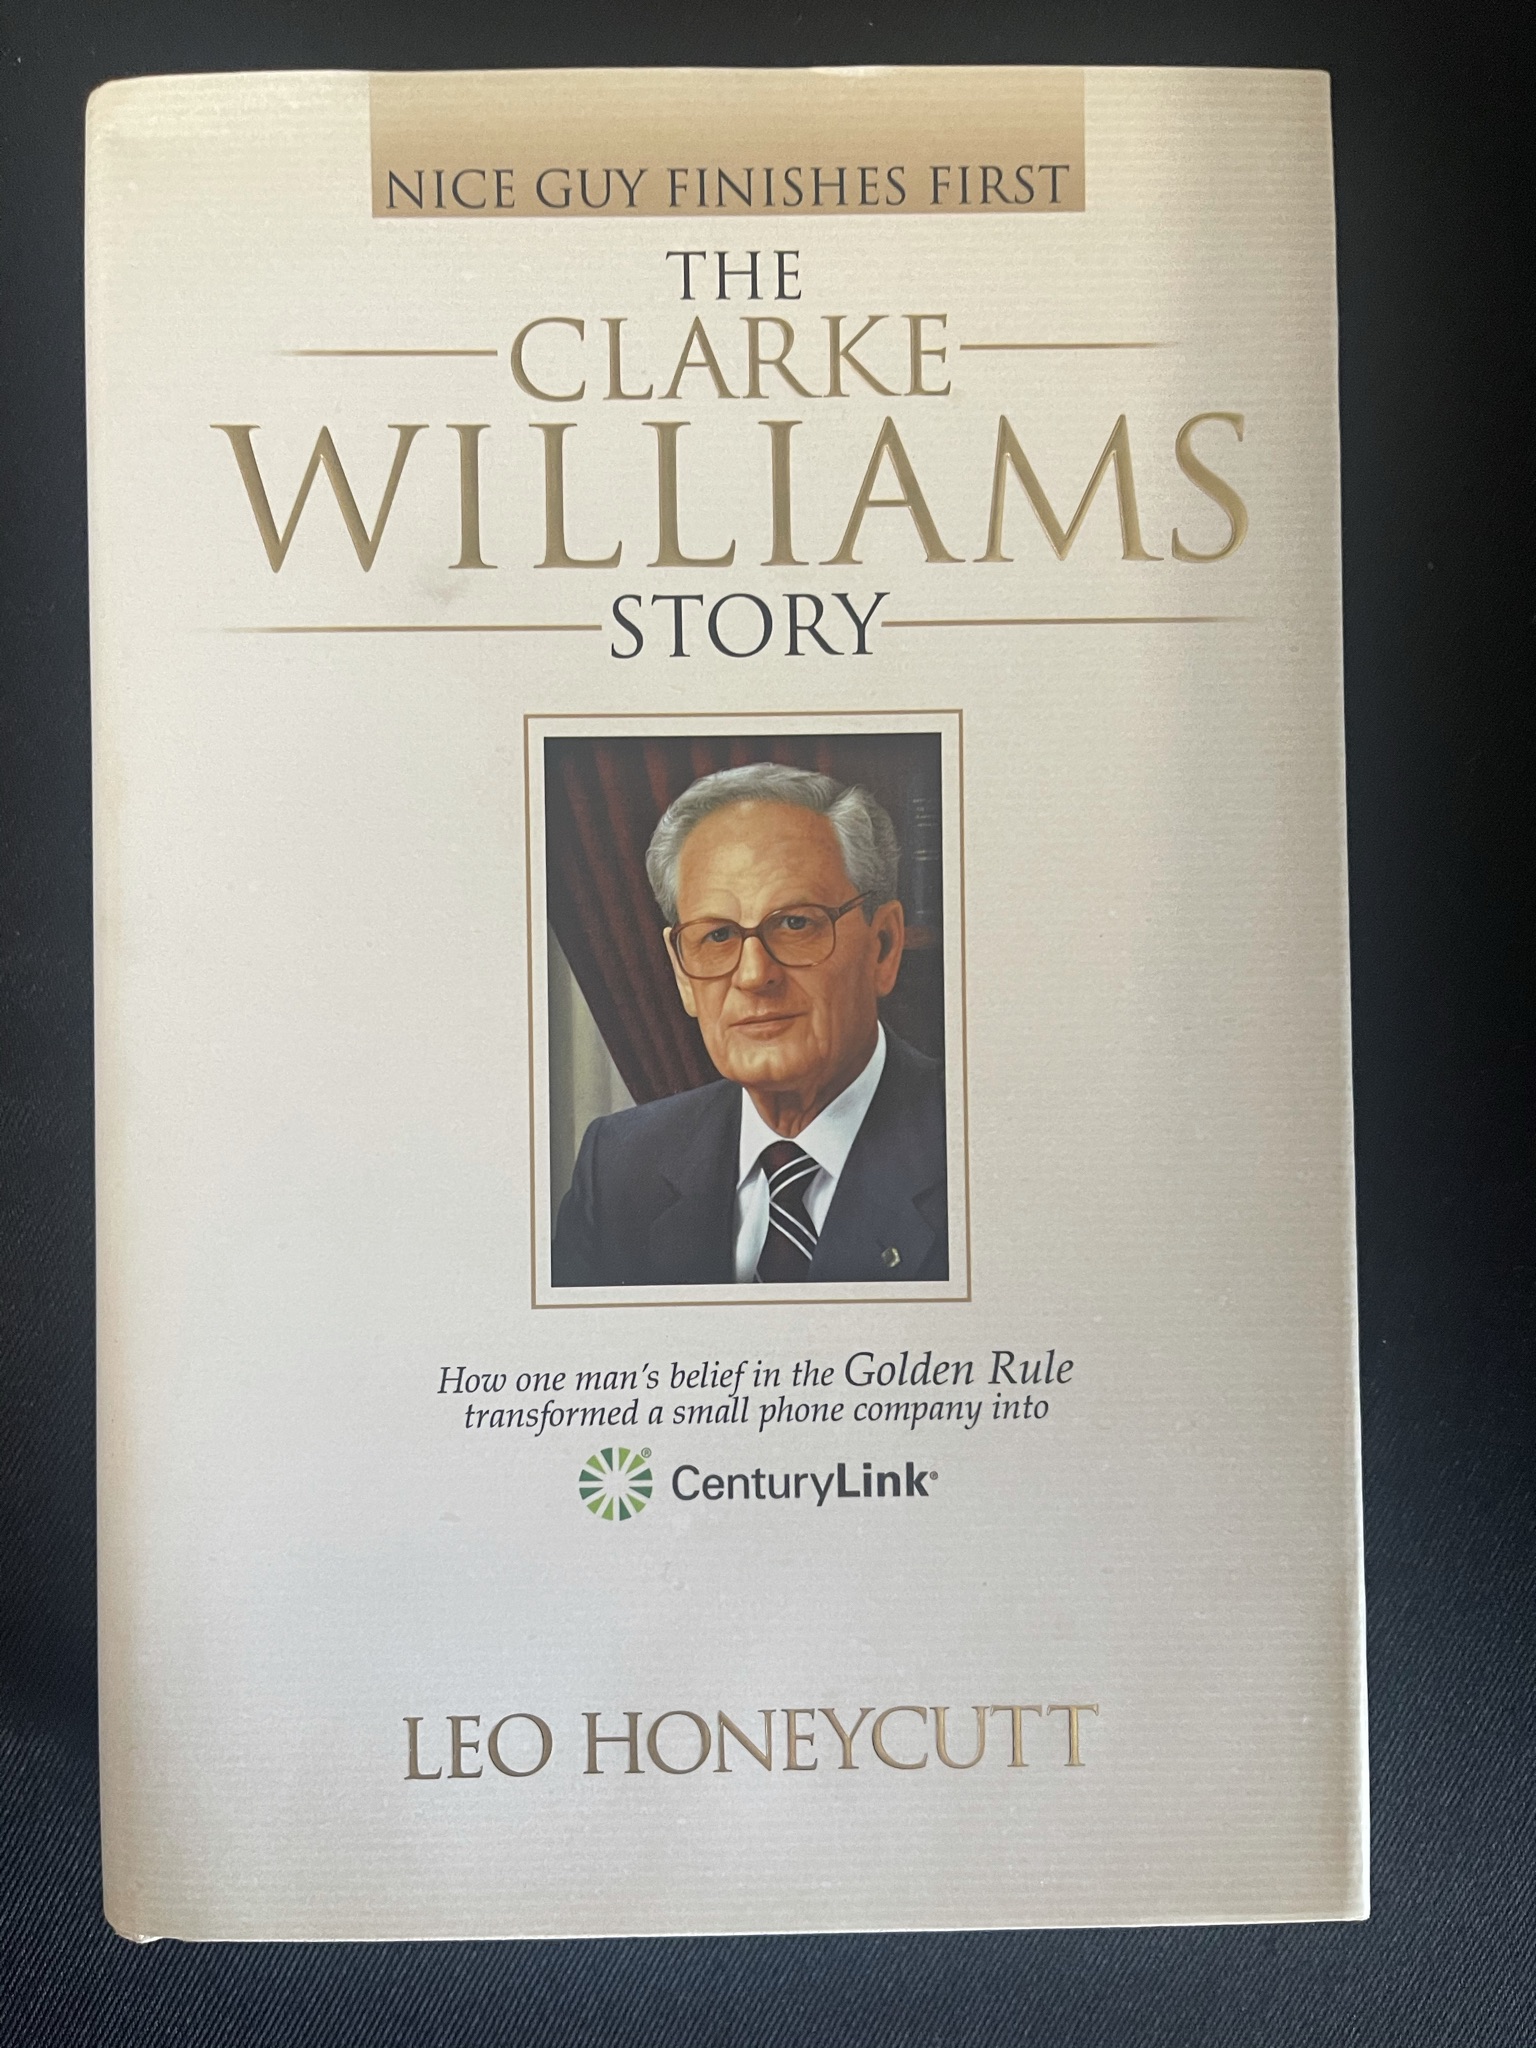 Featured image for “Clark Williams Story, The”